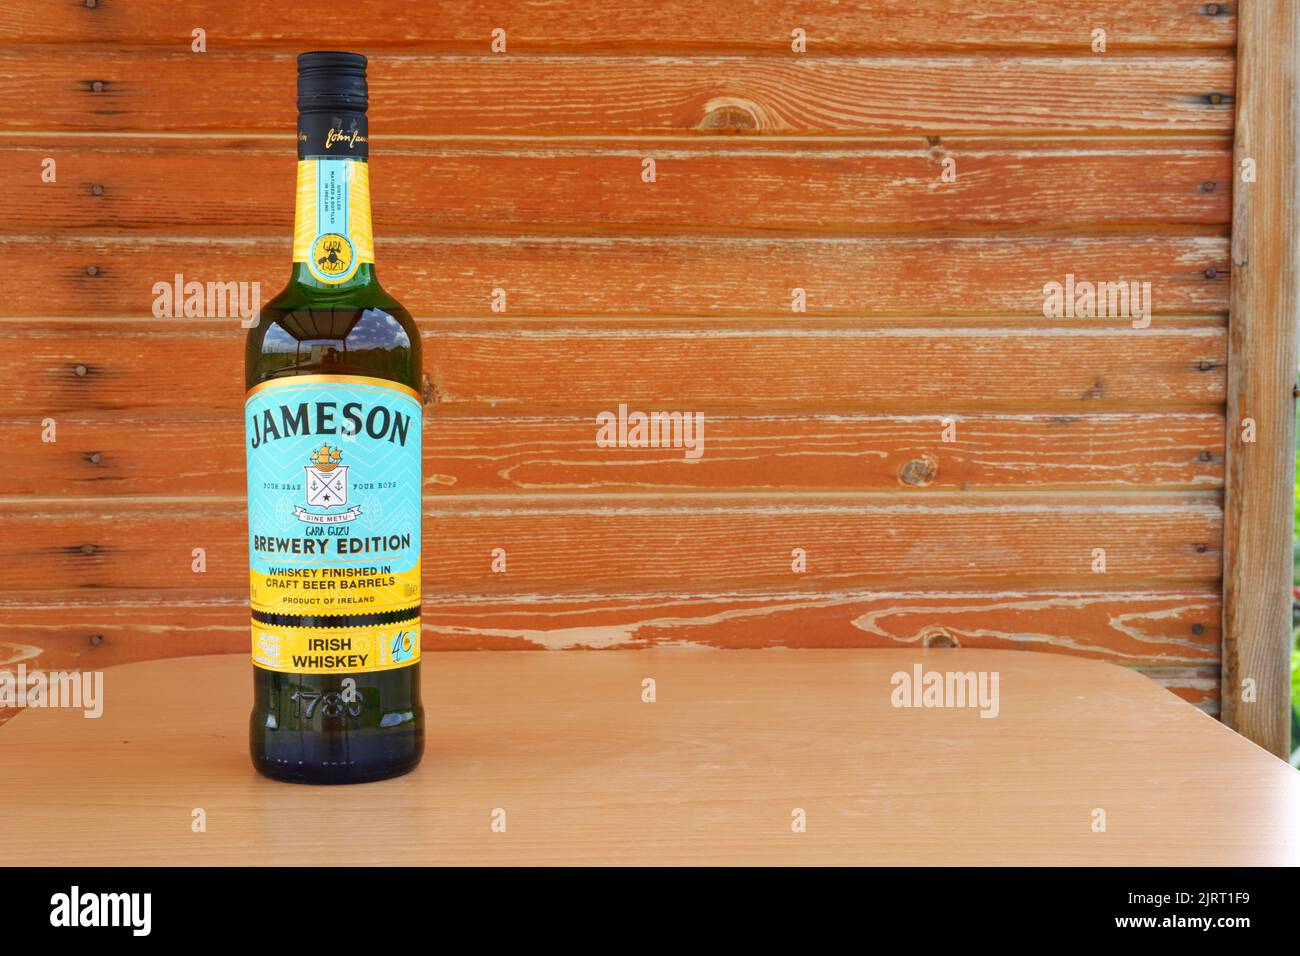 Bottle of Jameson Whiskey with wooden background Stock Photo